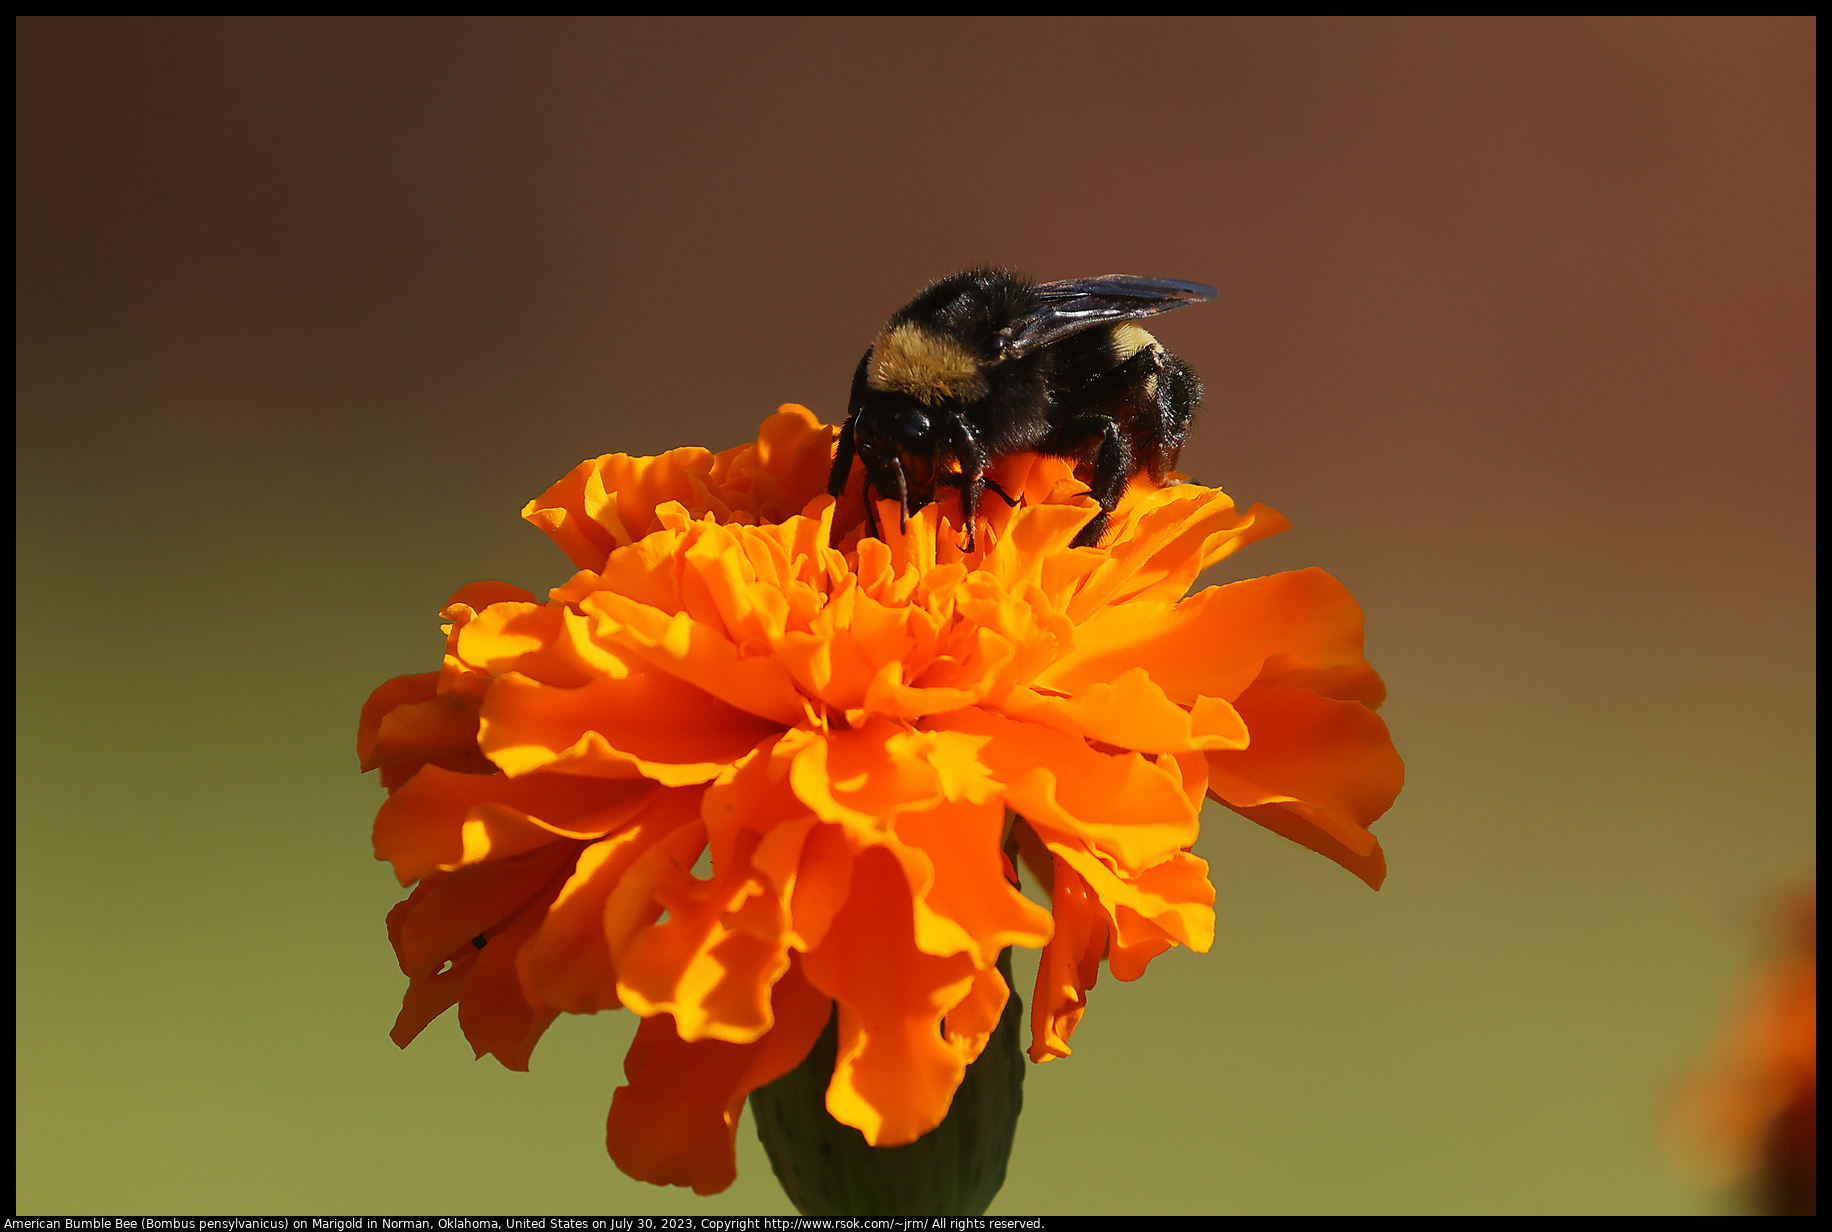 American Bumble Bee (Bombus pensylvanicus) on Marigold in Norman, Oklahoma, United States on July 30, 2023